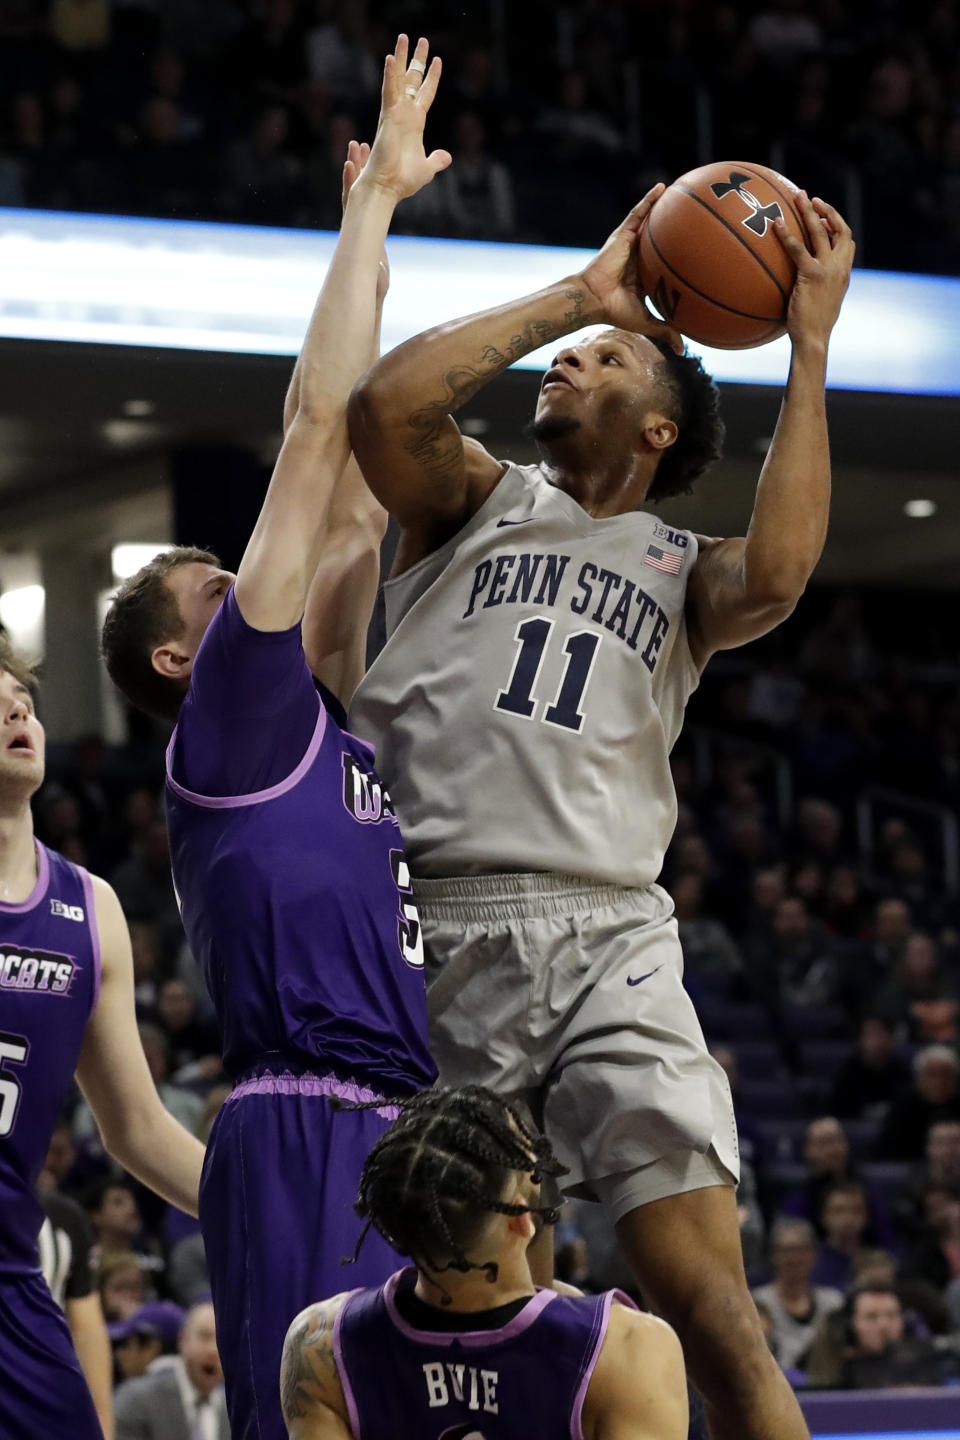 Penn State forward Lamar Stevens, right, goes up to shoot against Northwestern forward Robbie Beran during the first half of an NCAA college basketball game in Evanston, Ill., Saturday, March 7, 2020. (AP Photo/Nam Y. Huh)